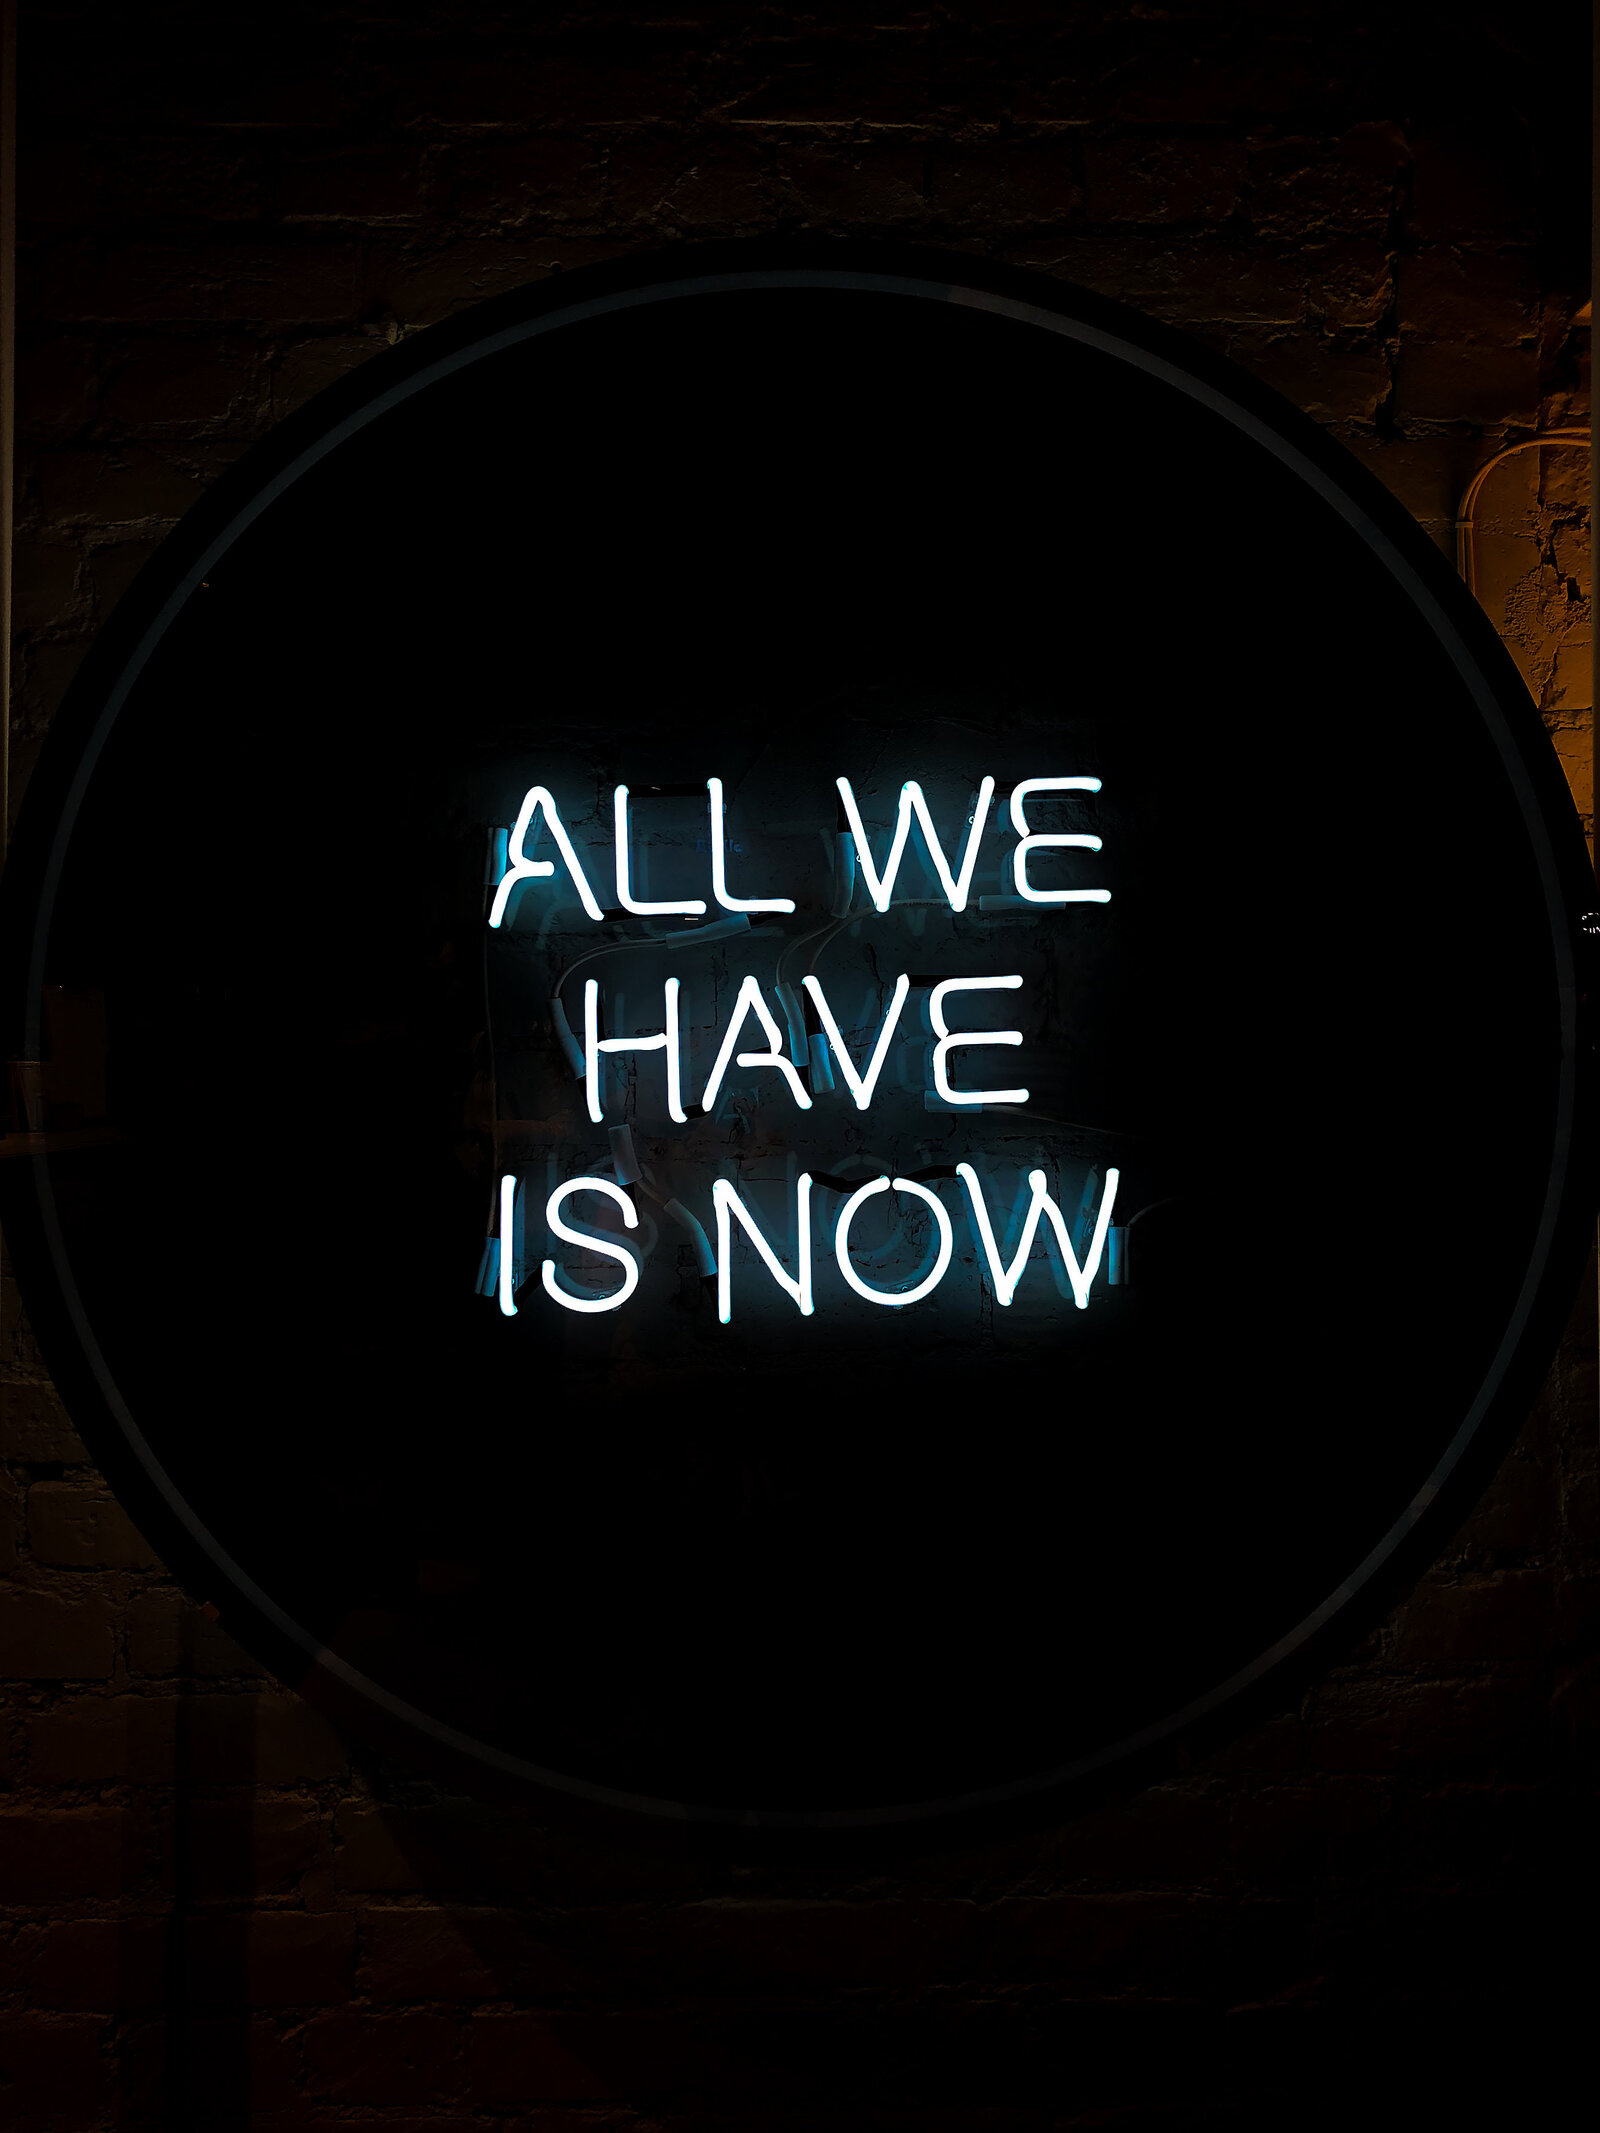 Canva - White All We Have Is Now Neon Signage on Black Surface